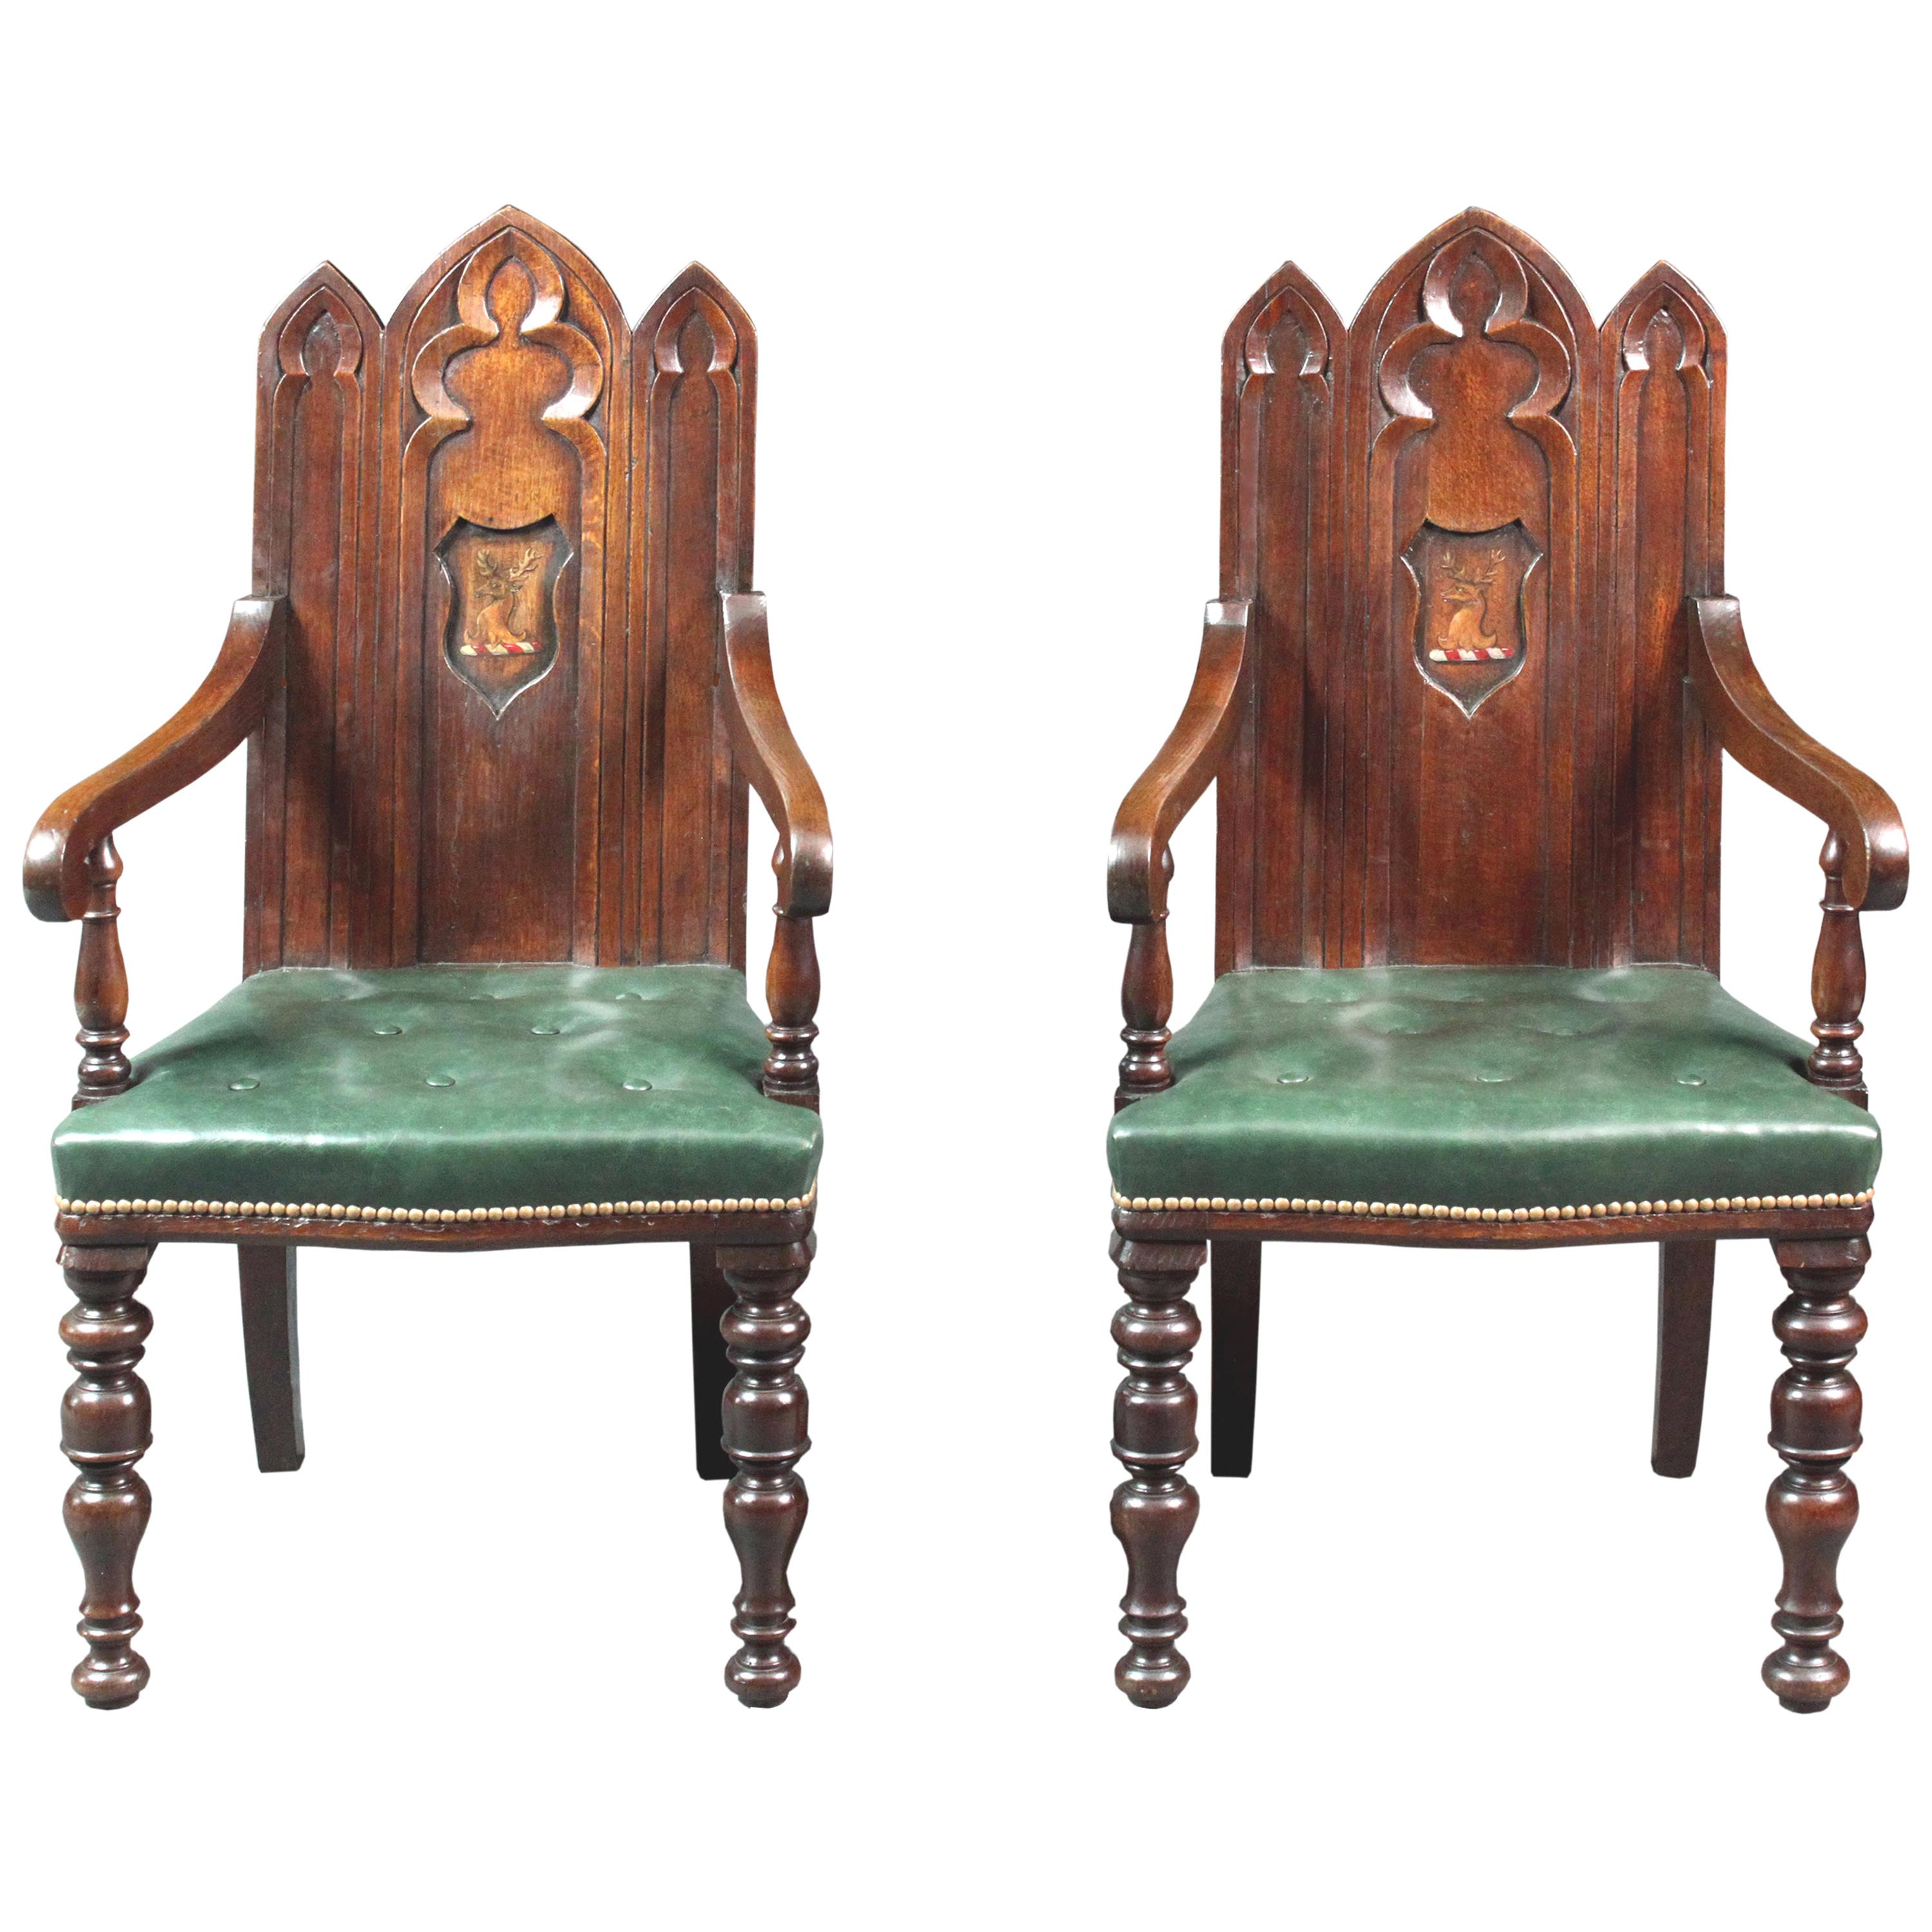 Pair of Armorial Gothic Oak Chairs with Arms